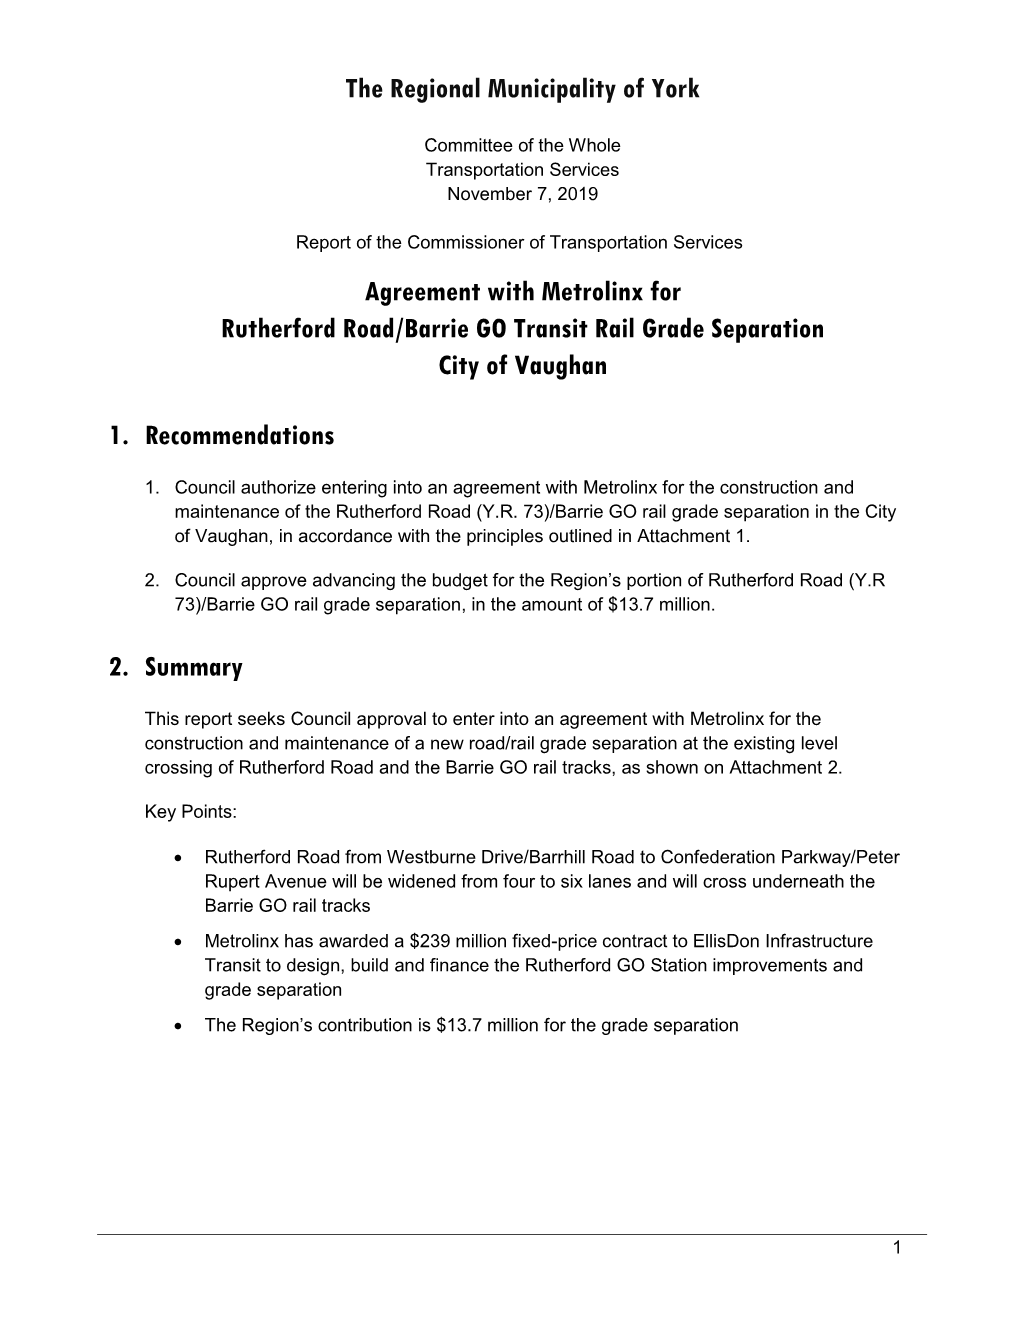 Agreement with Metrolinx for Rutherford Road/Barrie GO Transit Rail Grade Separation City of Vaughan